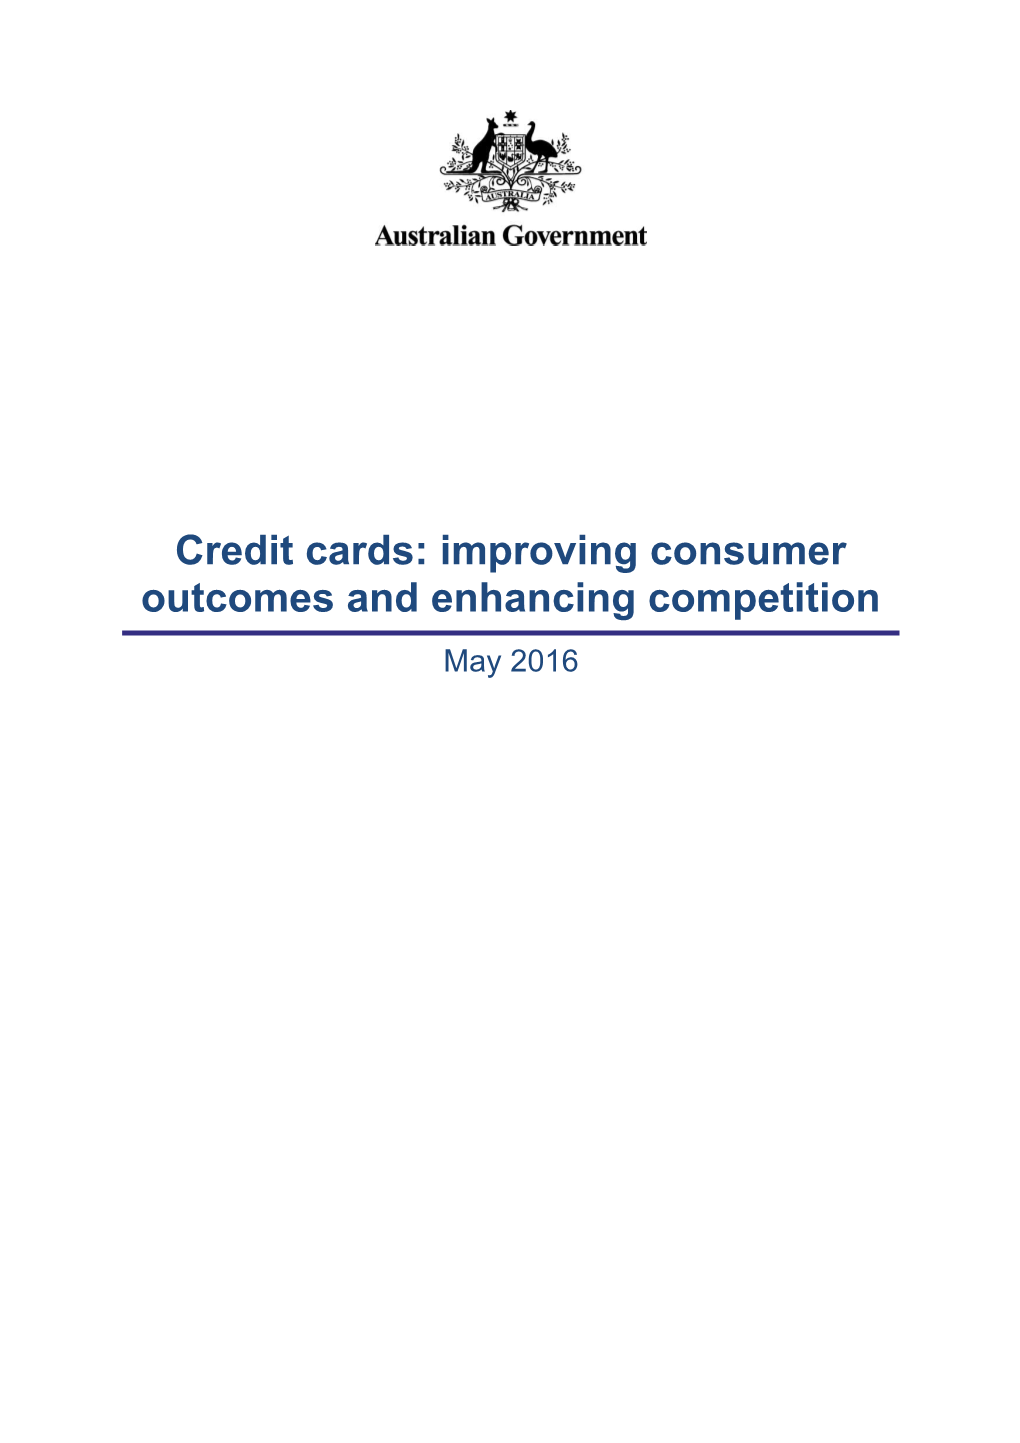 Credit Card: Improving Consumer Outcomes and Enhancing Competition